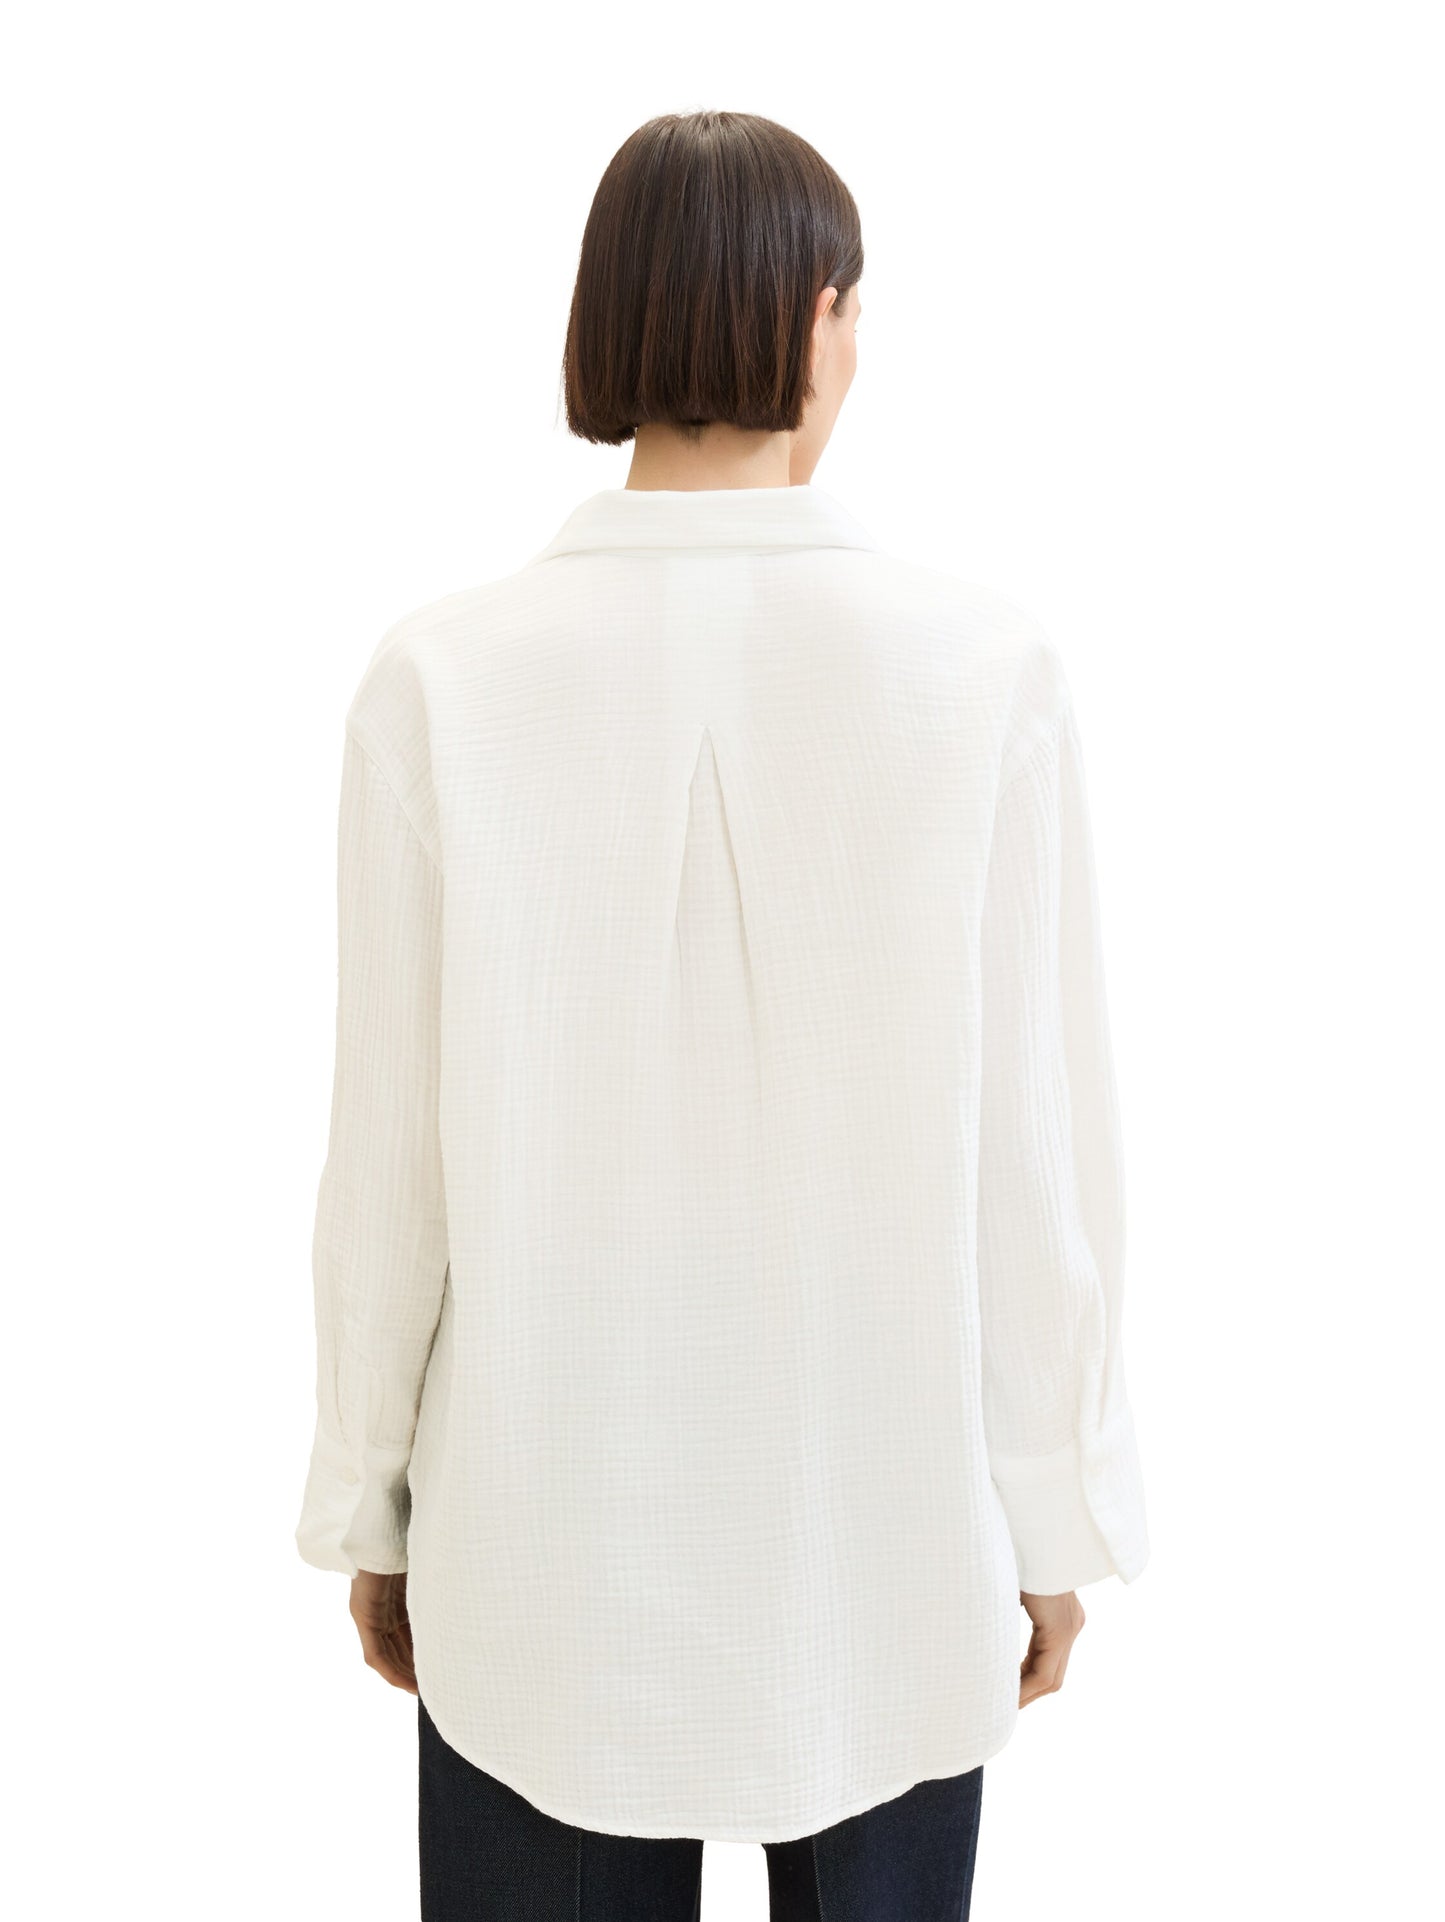 structured blouse shirt - 1042392